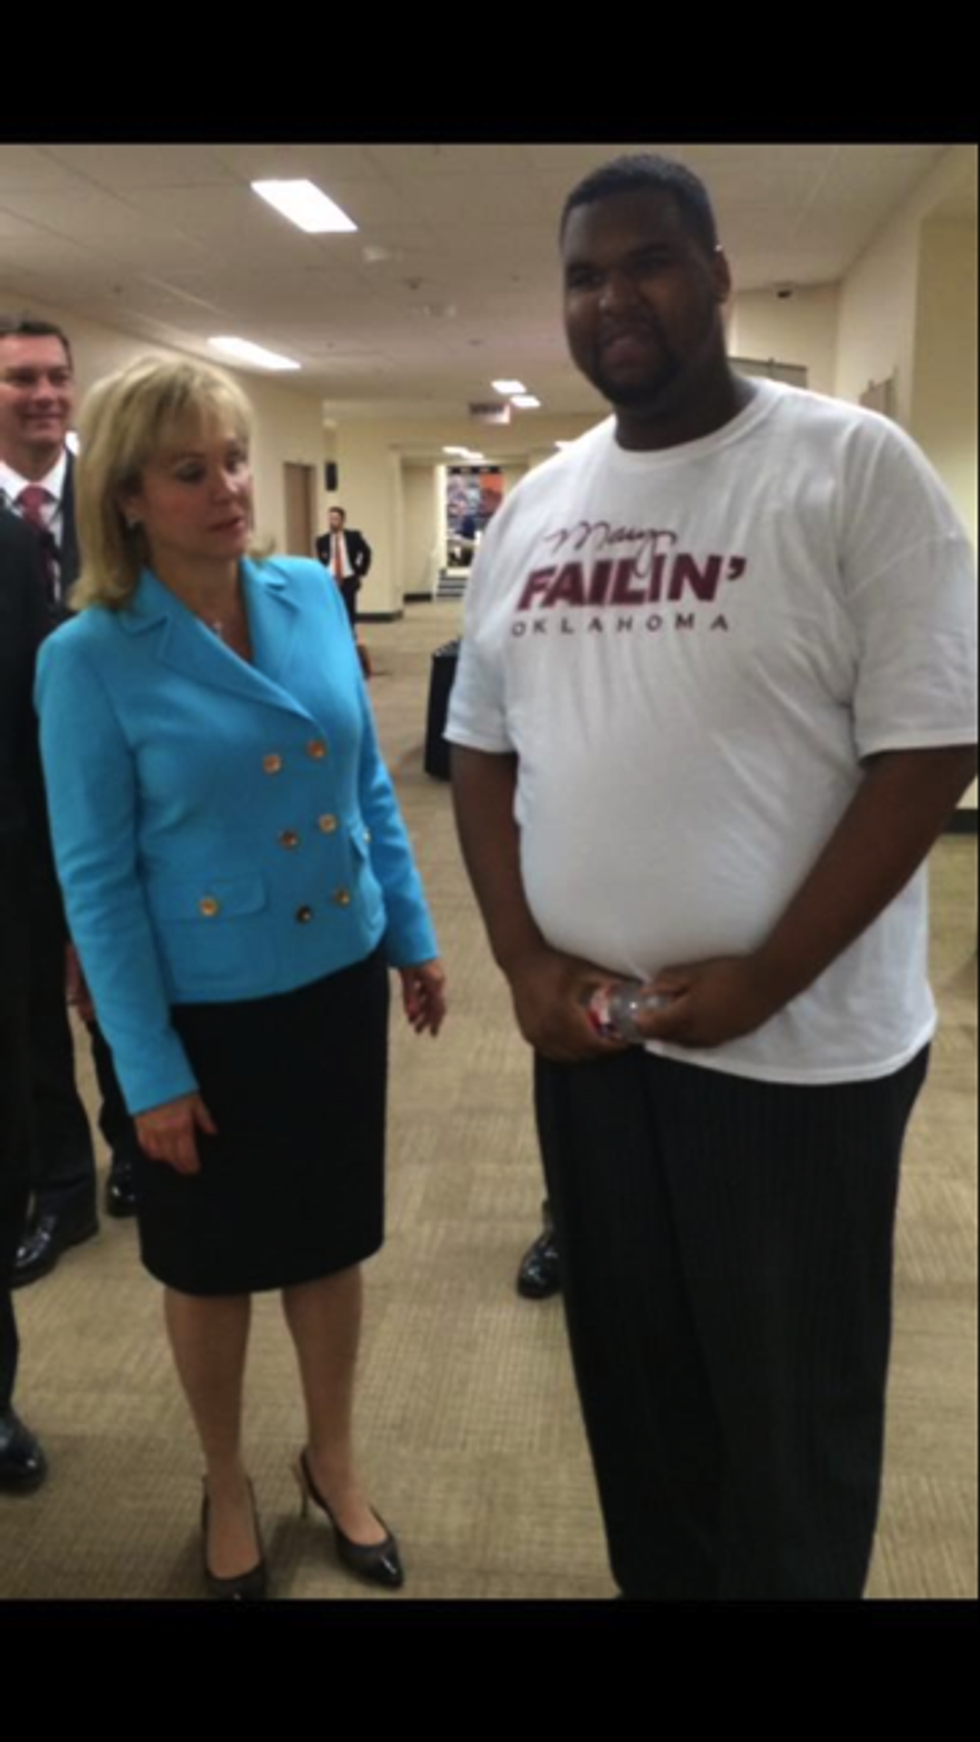 Oklahoma Gov. Mary Fallin Tosses Some Tasty Word Salad About Science, You Betcha